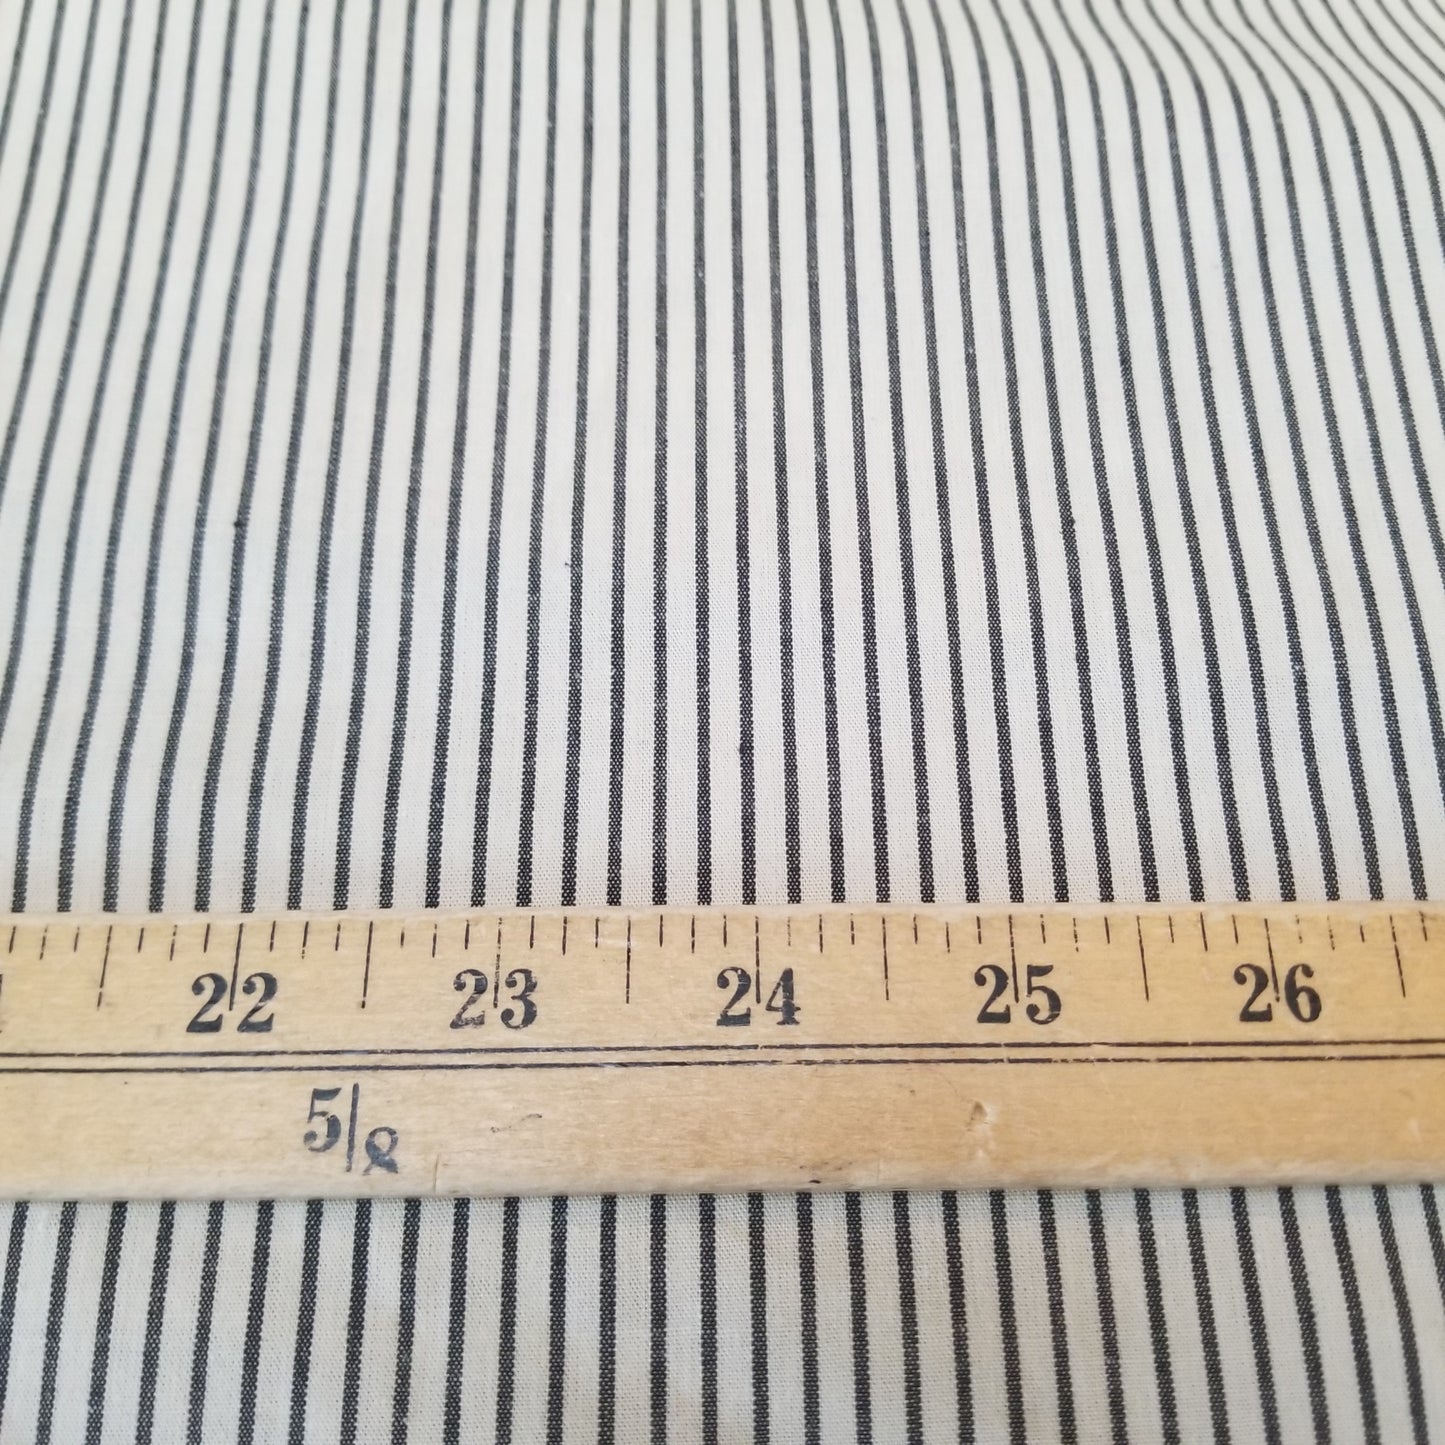 Designer Deadstock Cotton Shirting Vertical Micro Stripe Black and Cream Woven- by the yard